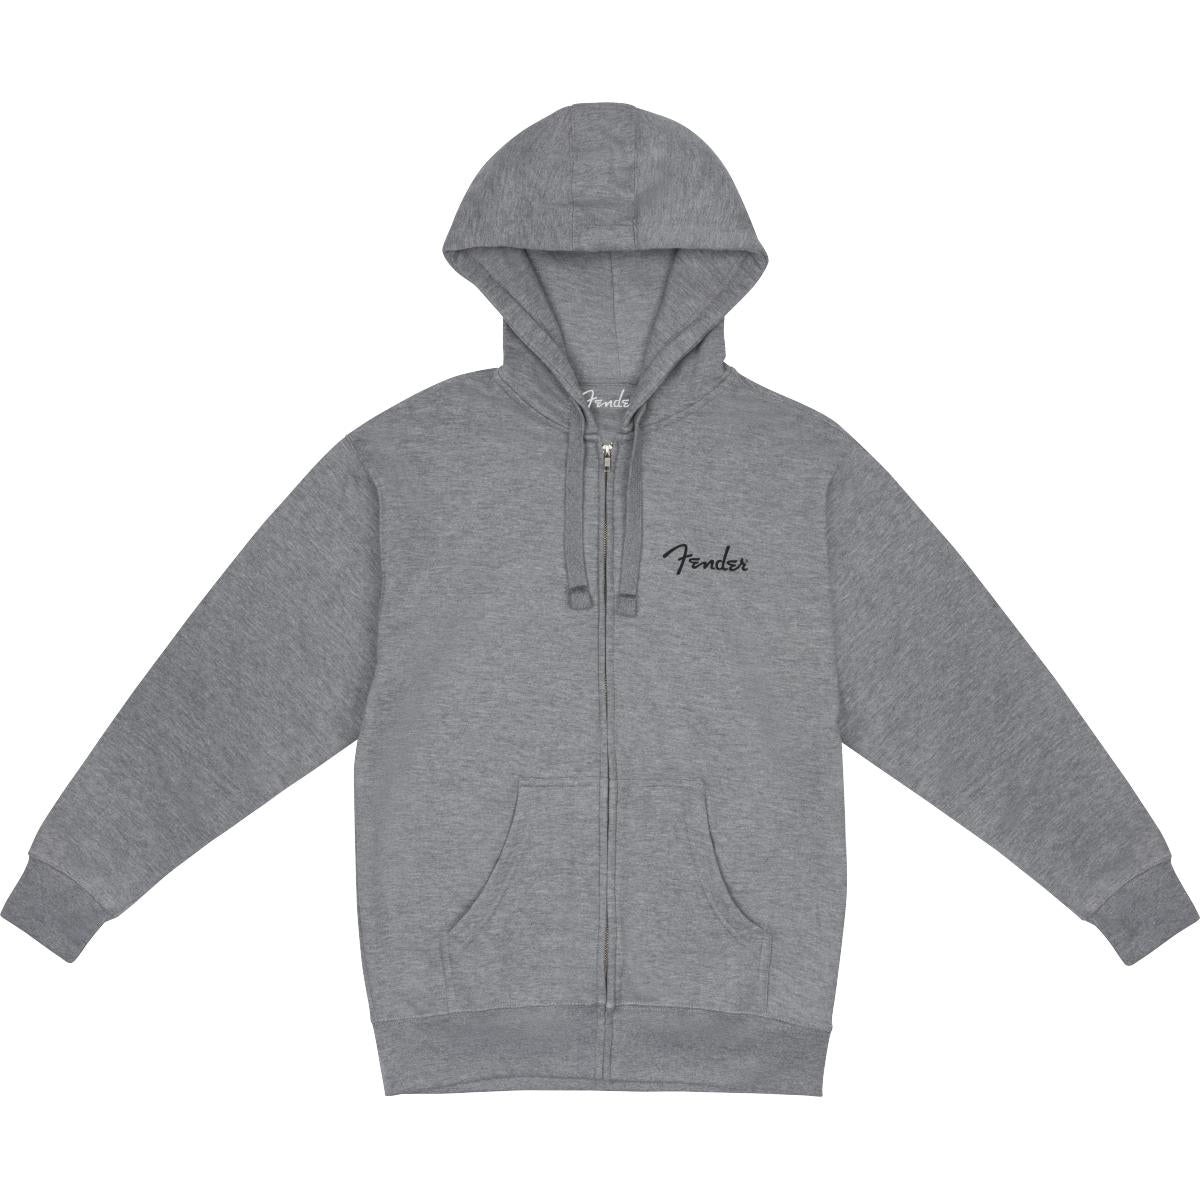 Gray heather zip front hoodie Small Fender black logo left chest hit 65% cotton 35% polyester Machine wash cold Tumble dry low Do not bleach, do not iron Sizes: Mens S-XXL